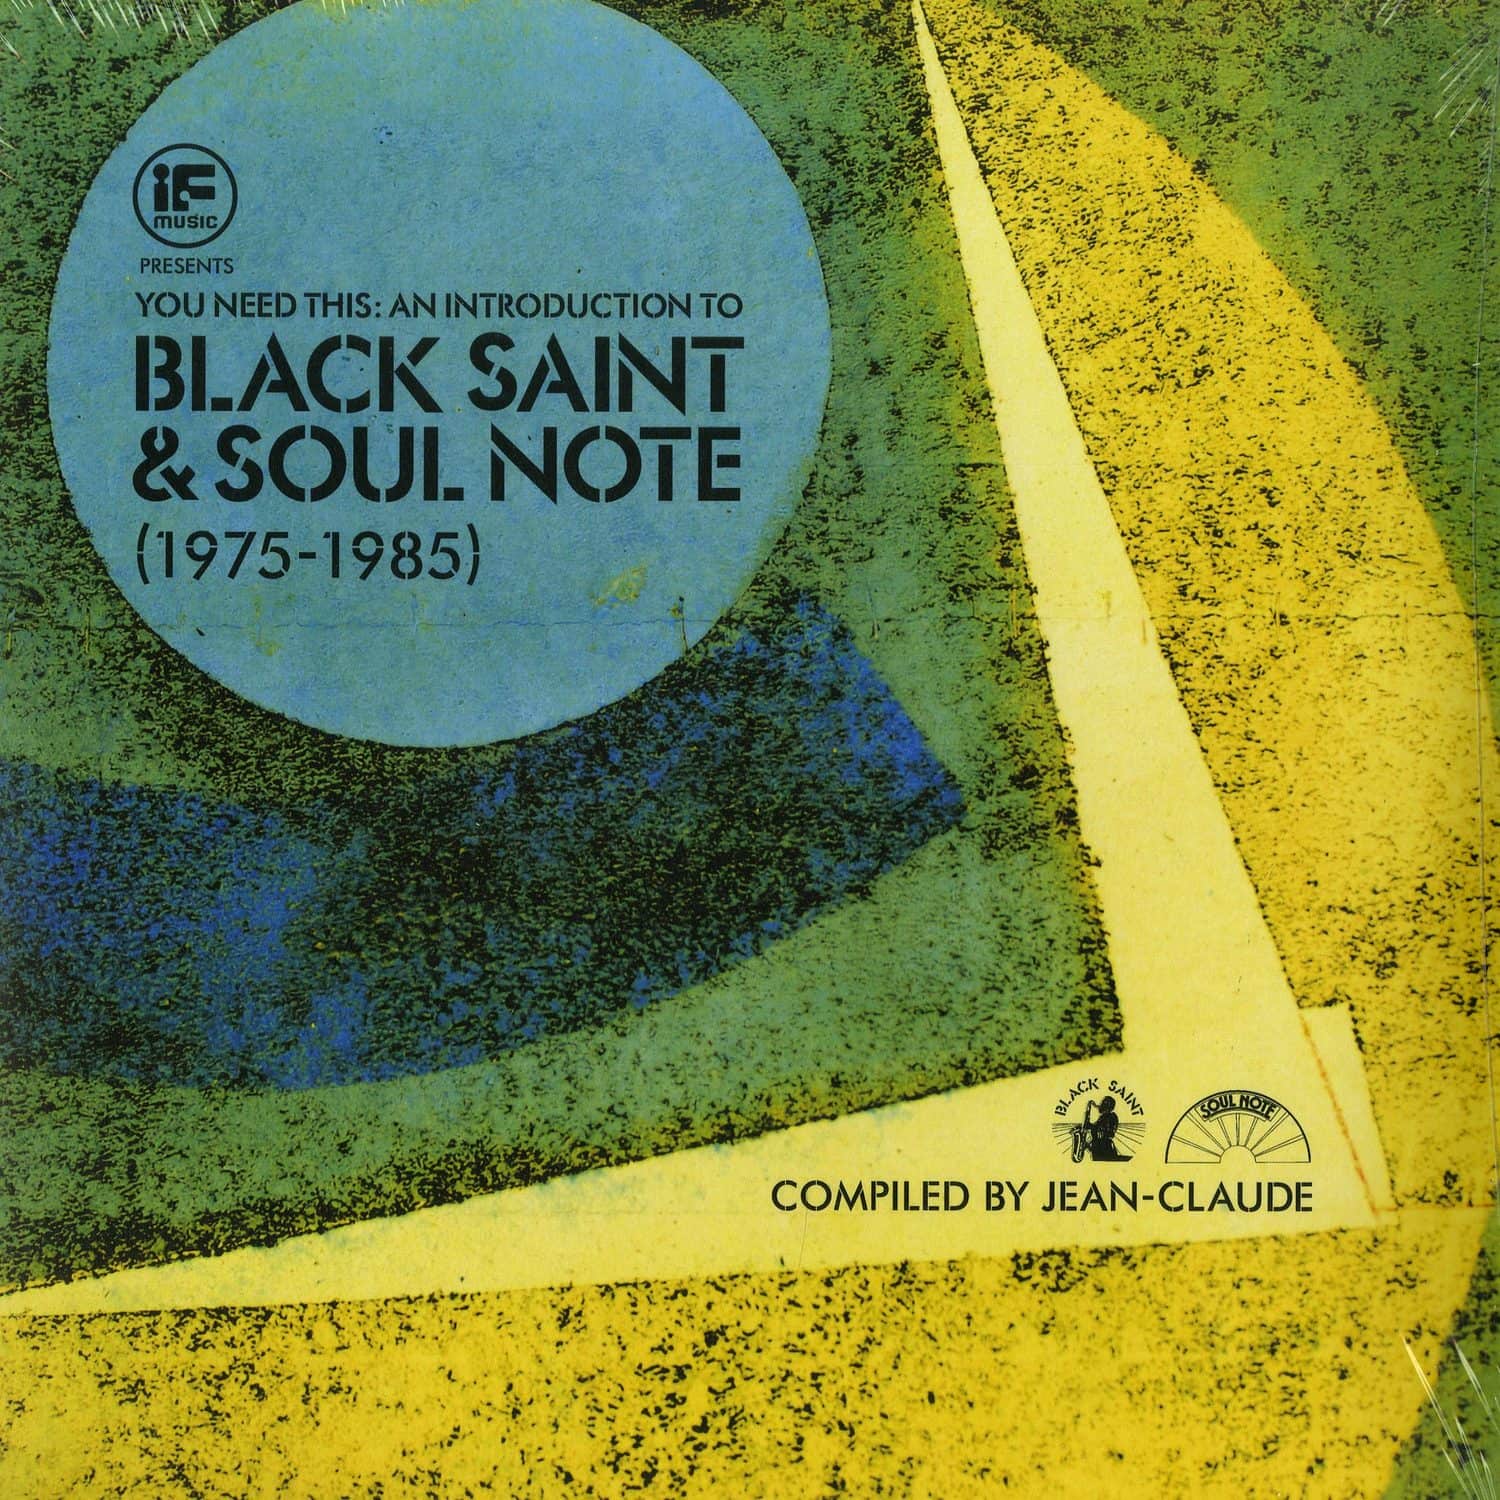 Various Artists - IF MUSIC PRES. YOU NEED THIS! AN INTRODUCTION TO BLACK SAINT & SOUL NOTE 1975-85 